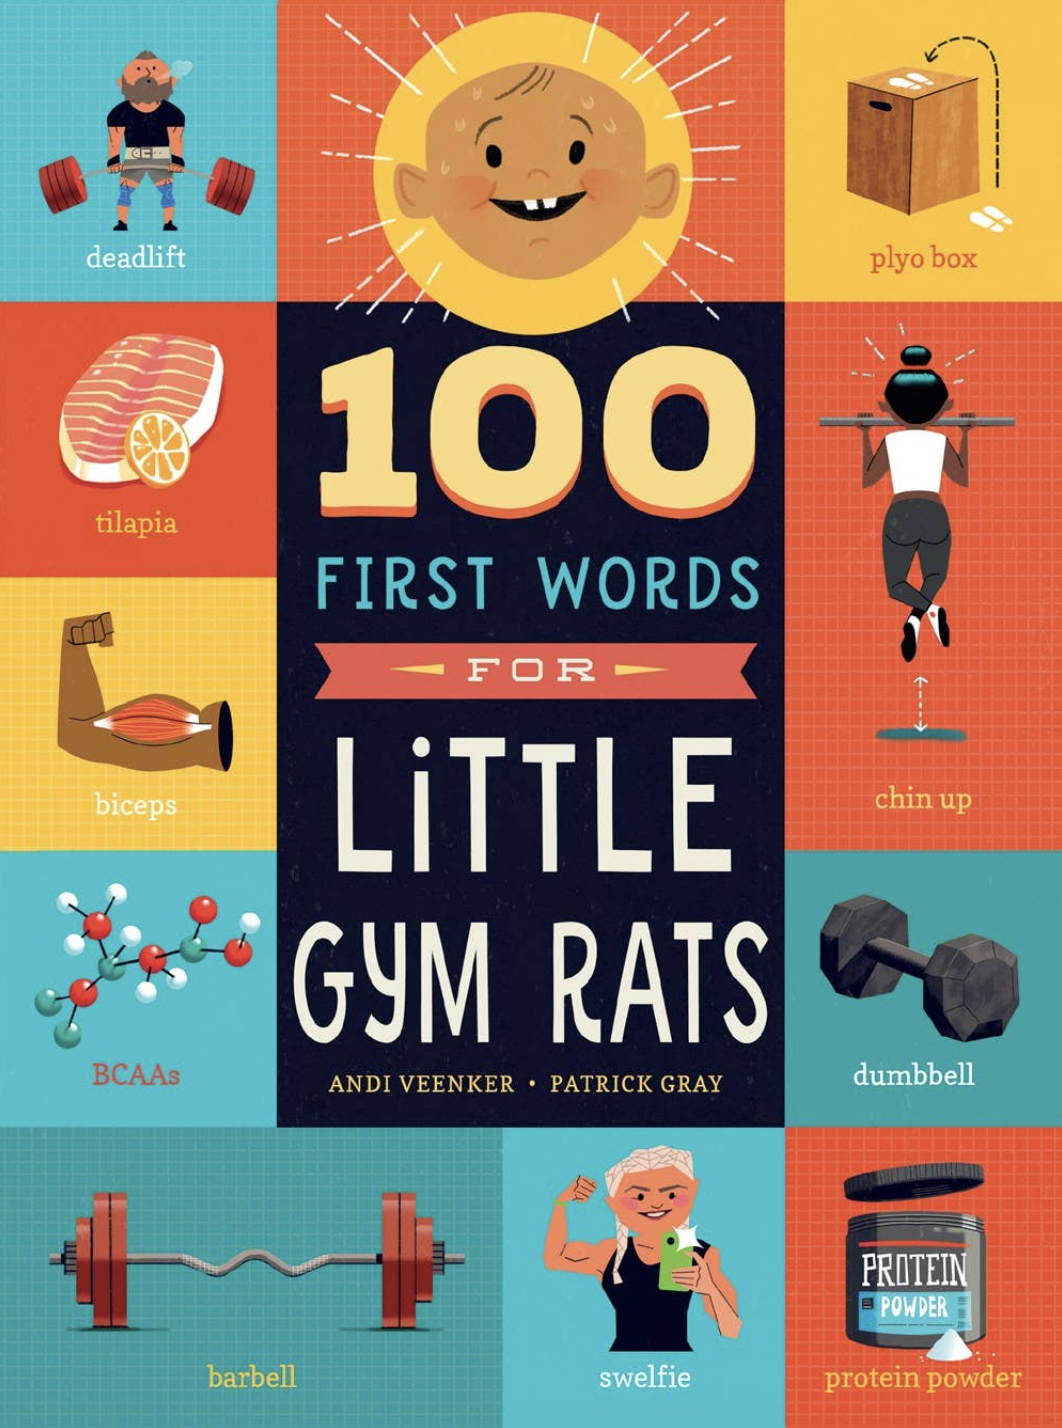 100 First Words for Gym Rats